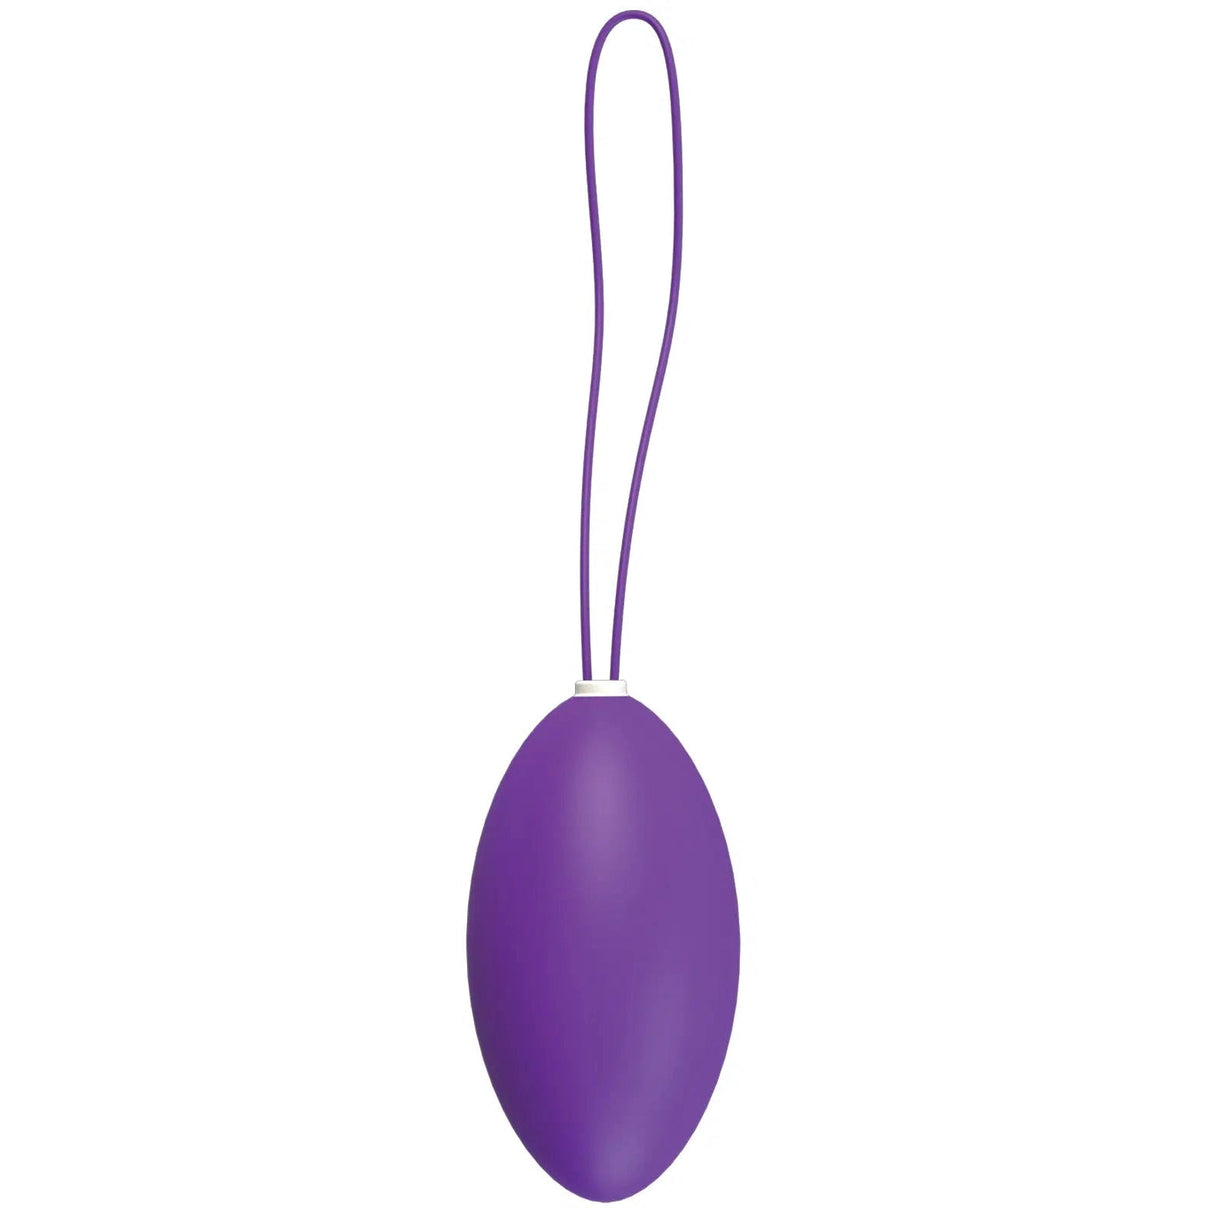 VeDO Peach Remote Control Rechargeable Egg Vibe